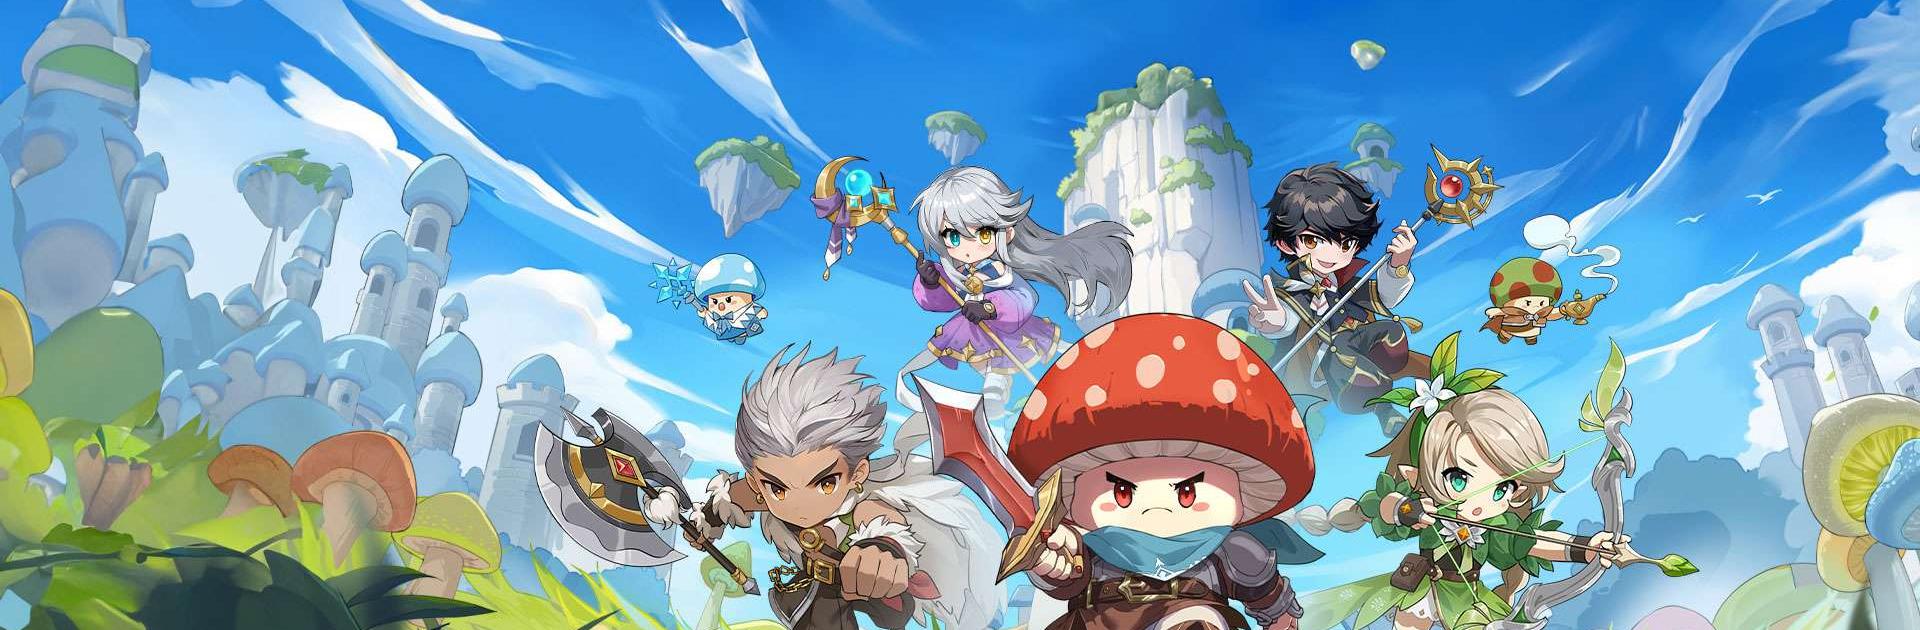 Legend of Mushroom Update Notice: New Gameplay Features and More!